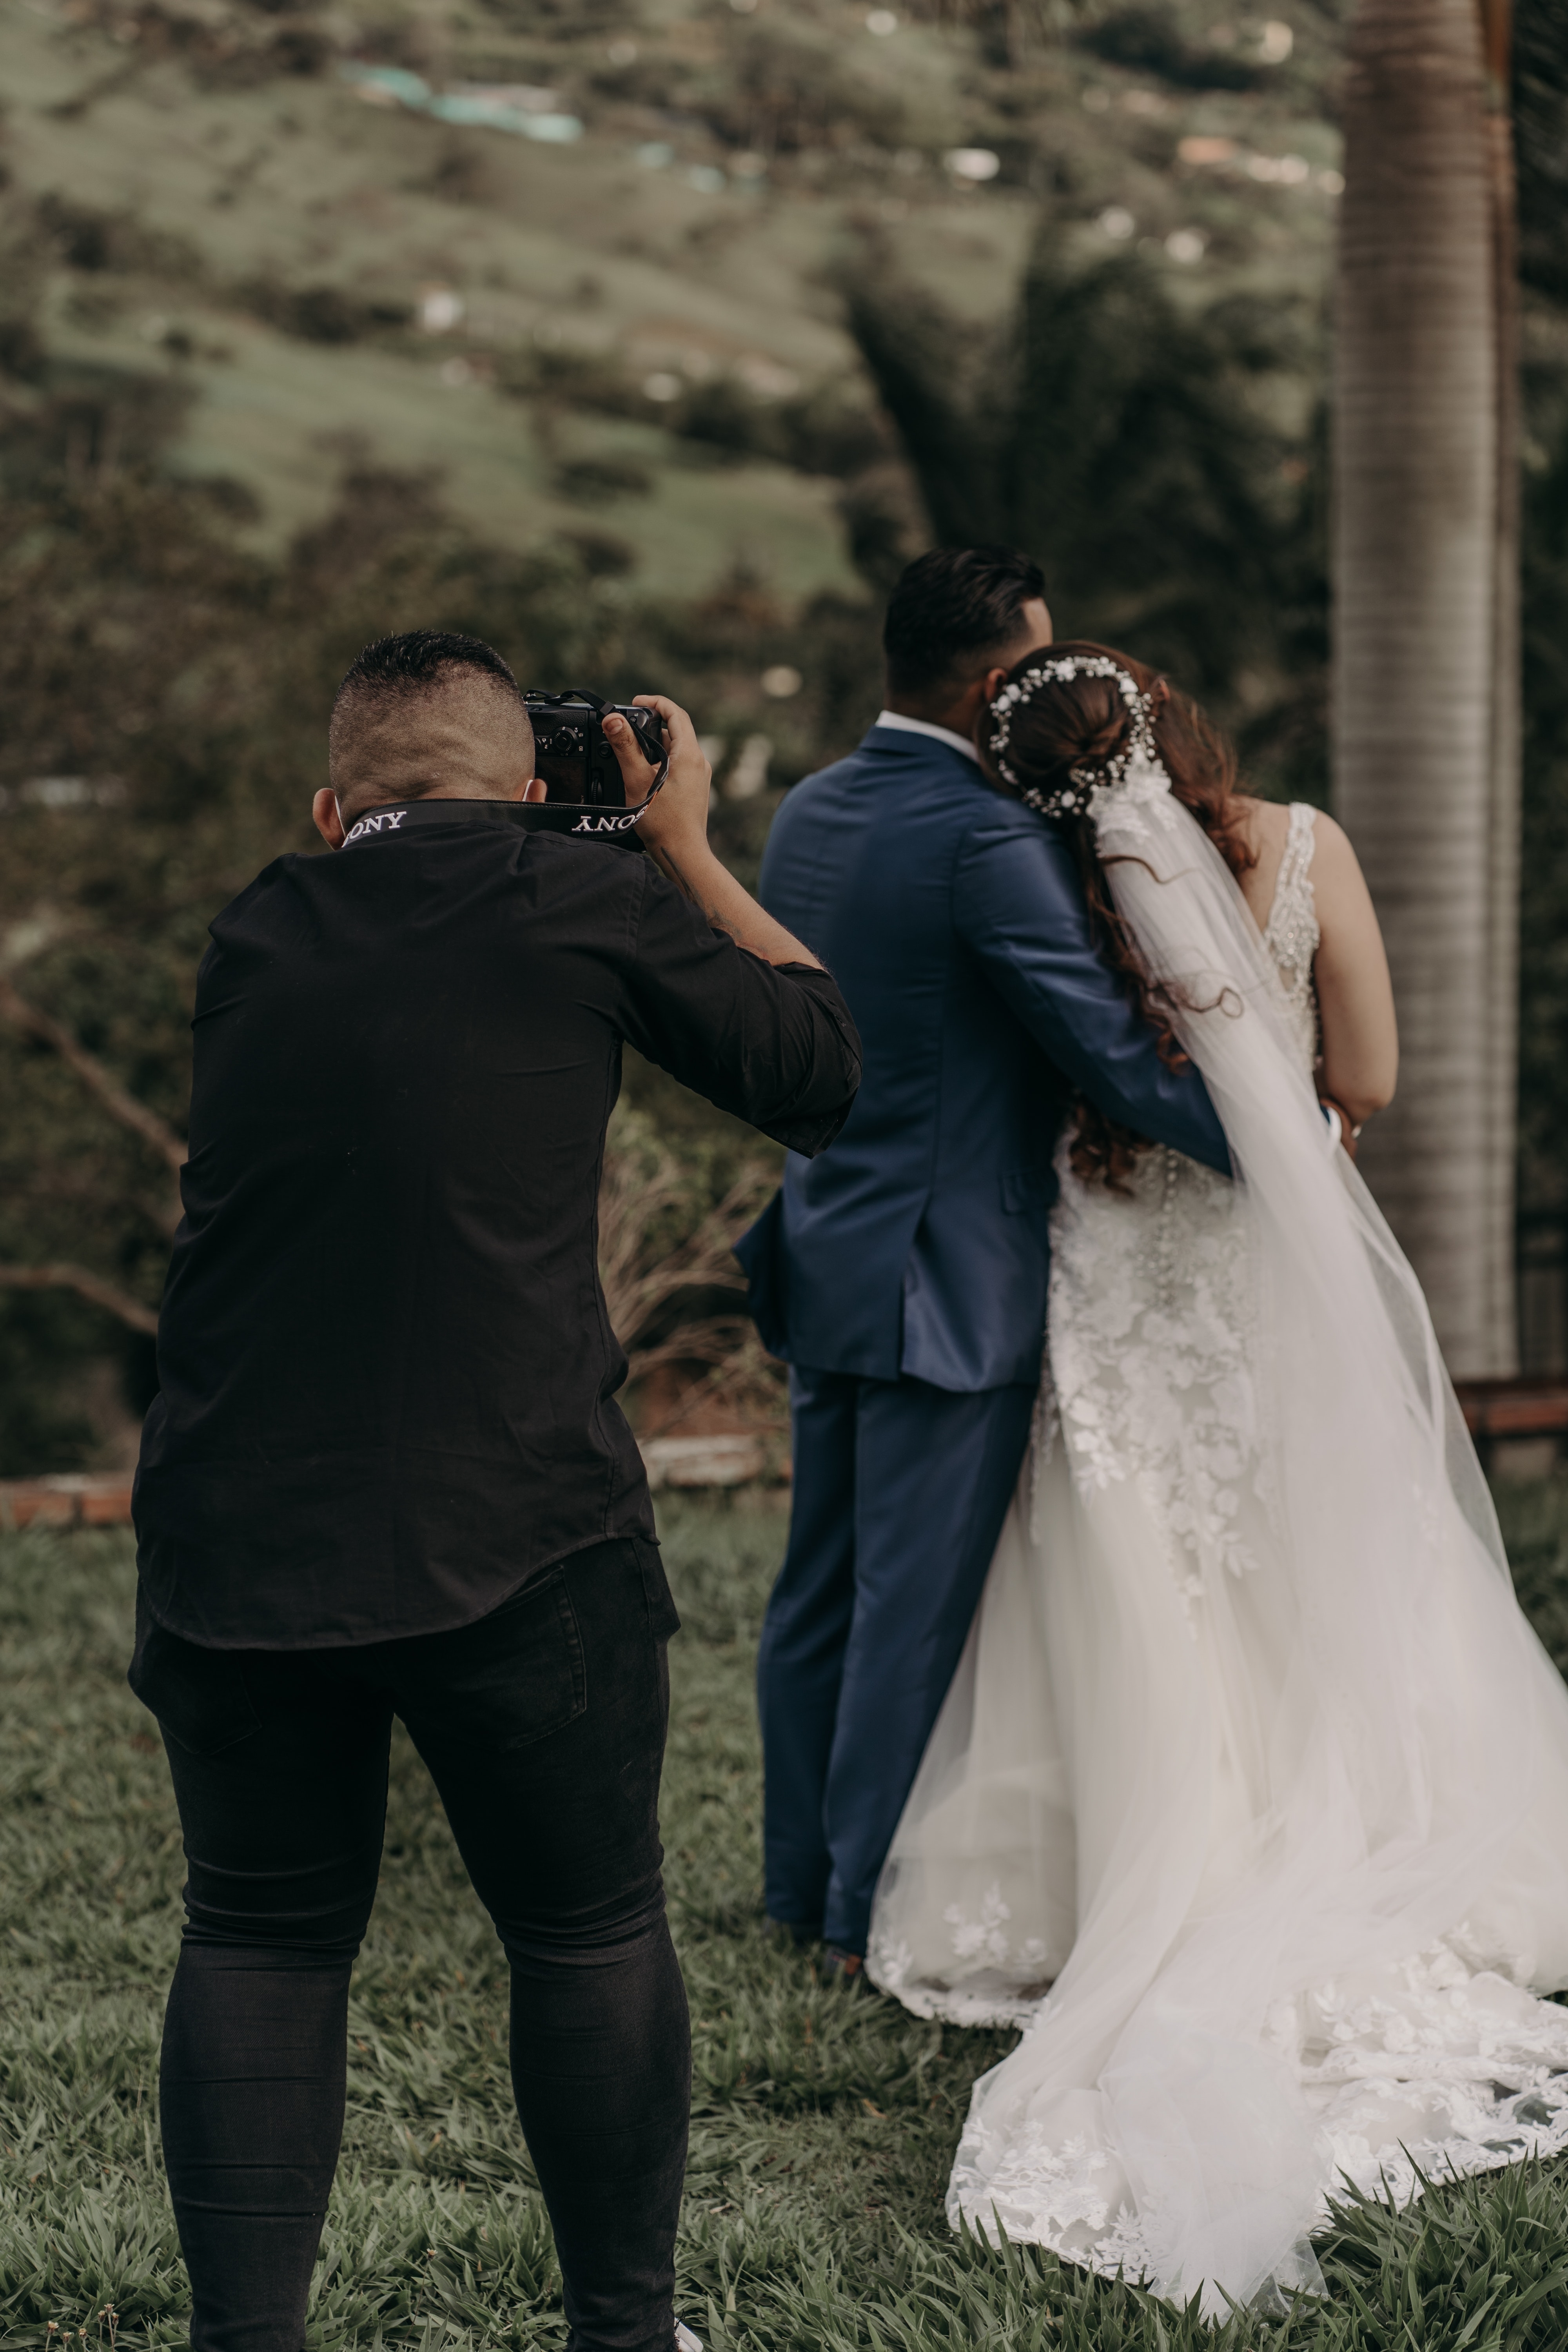 How Can You Find A Wedding Photographer?